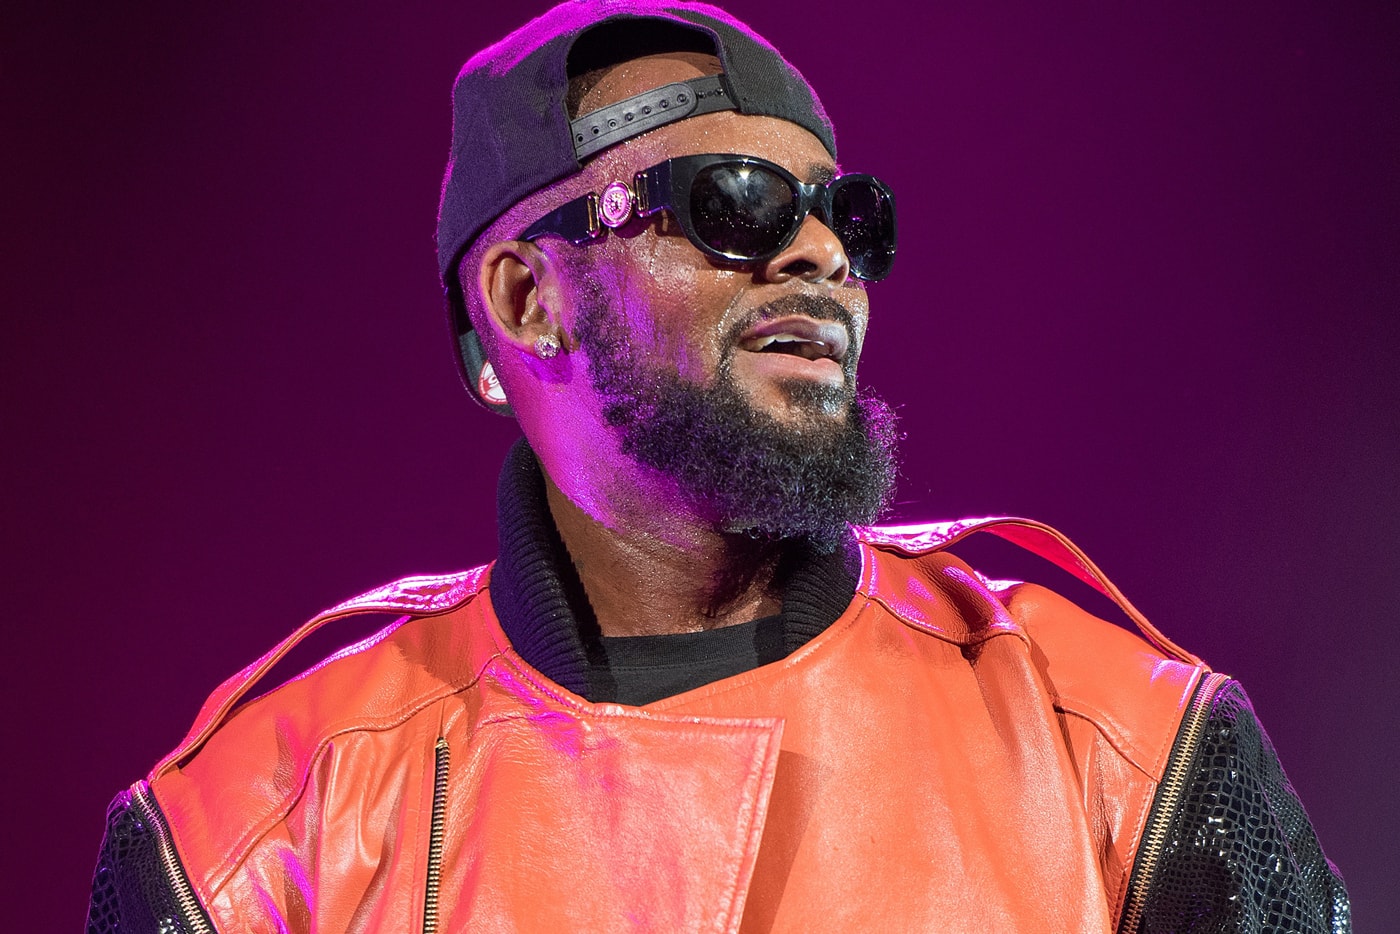 R Kelly Abusive Cult Allegations Response